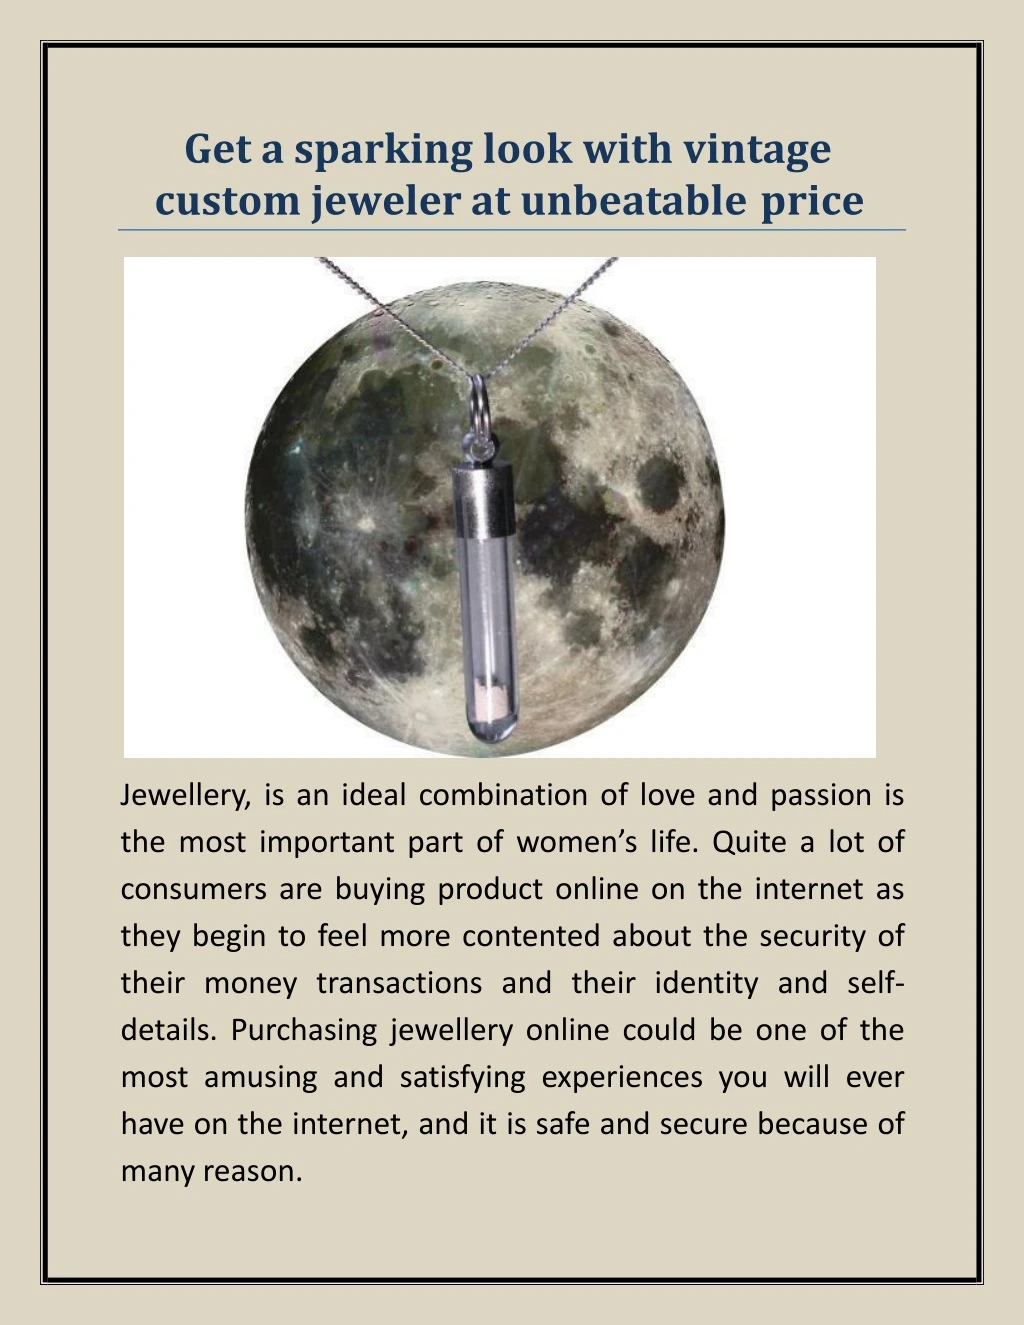 get a sparking look with vintage custom jeweler at unbeatable price